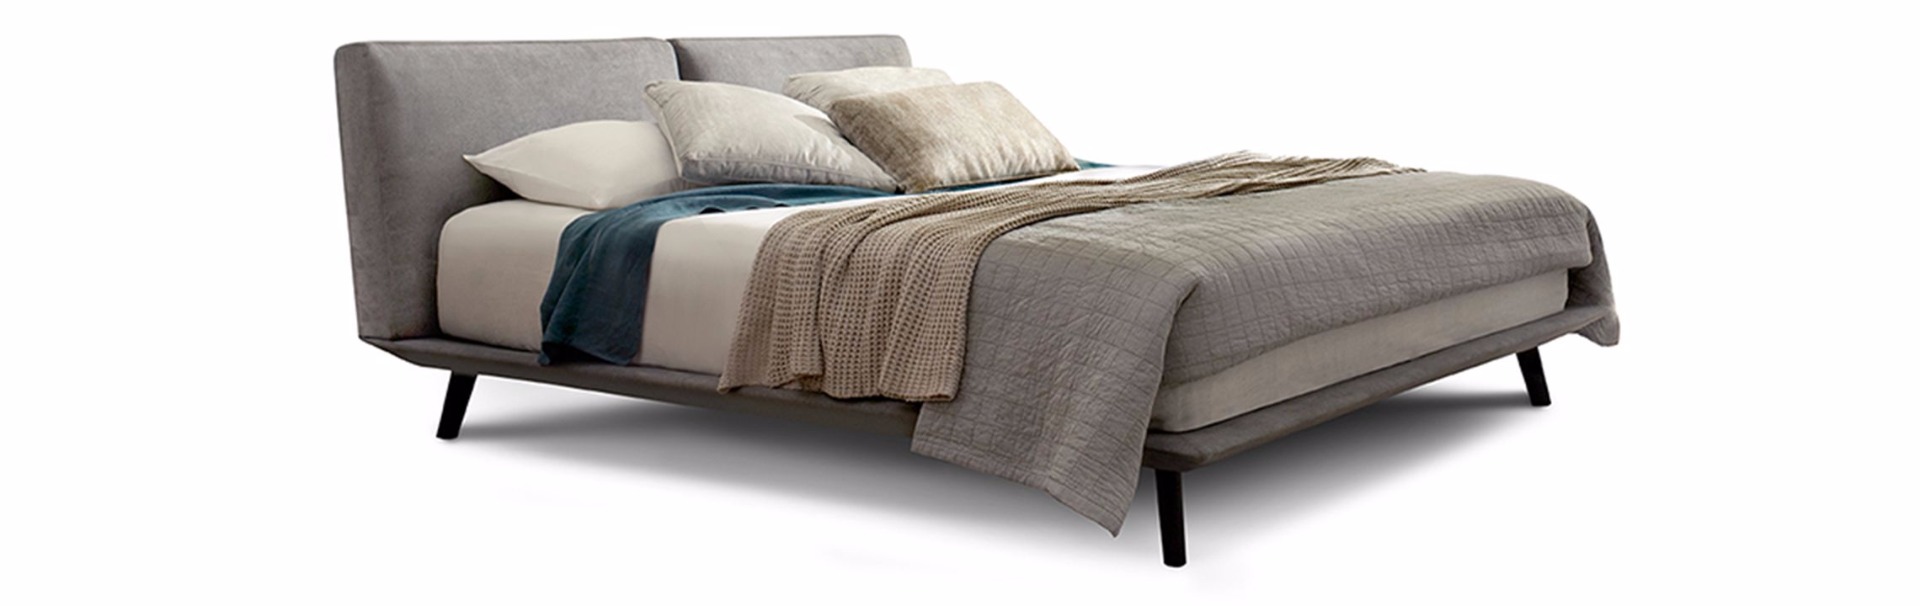 Neo Contemporary Bed | King Size Bed | Queen Size Bed | Double Size Bed ...